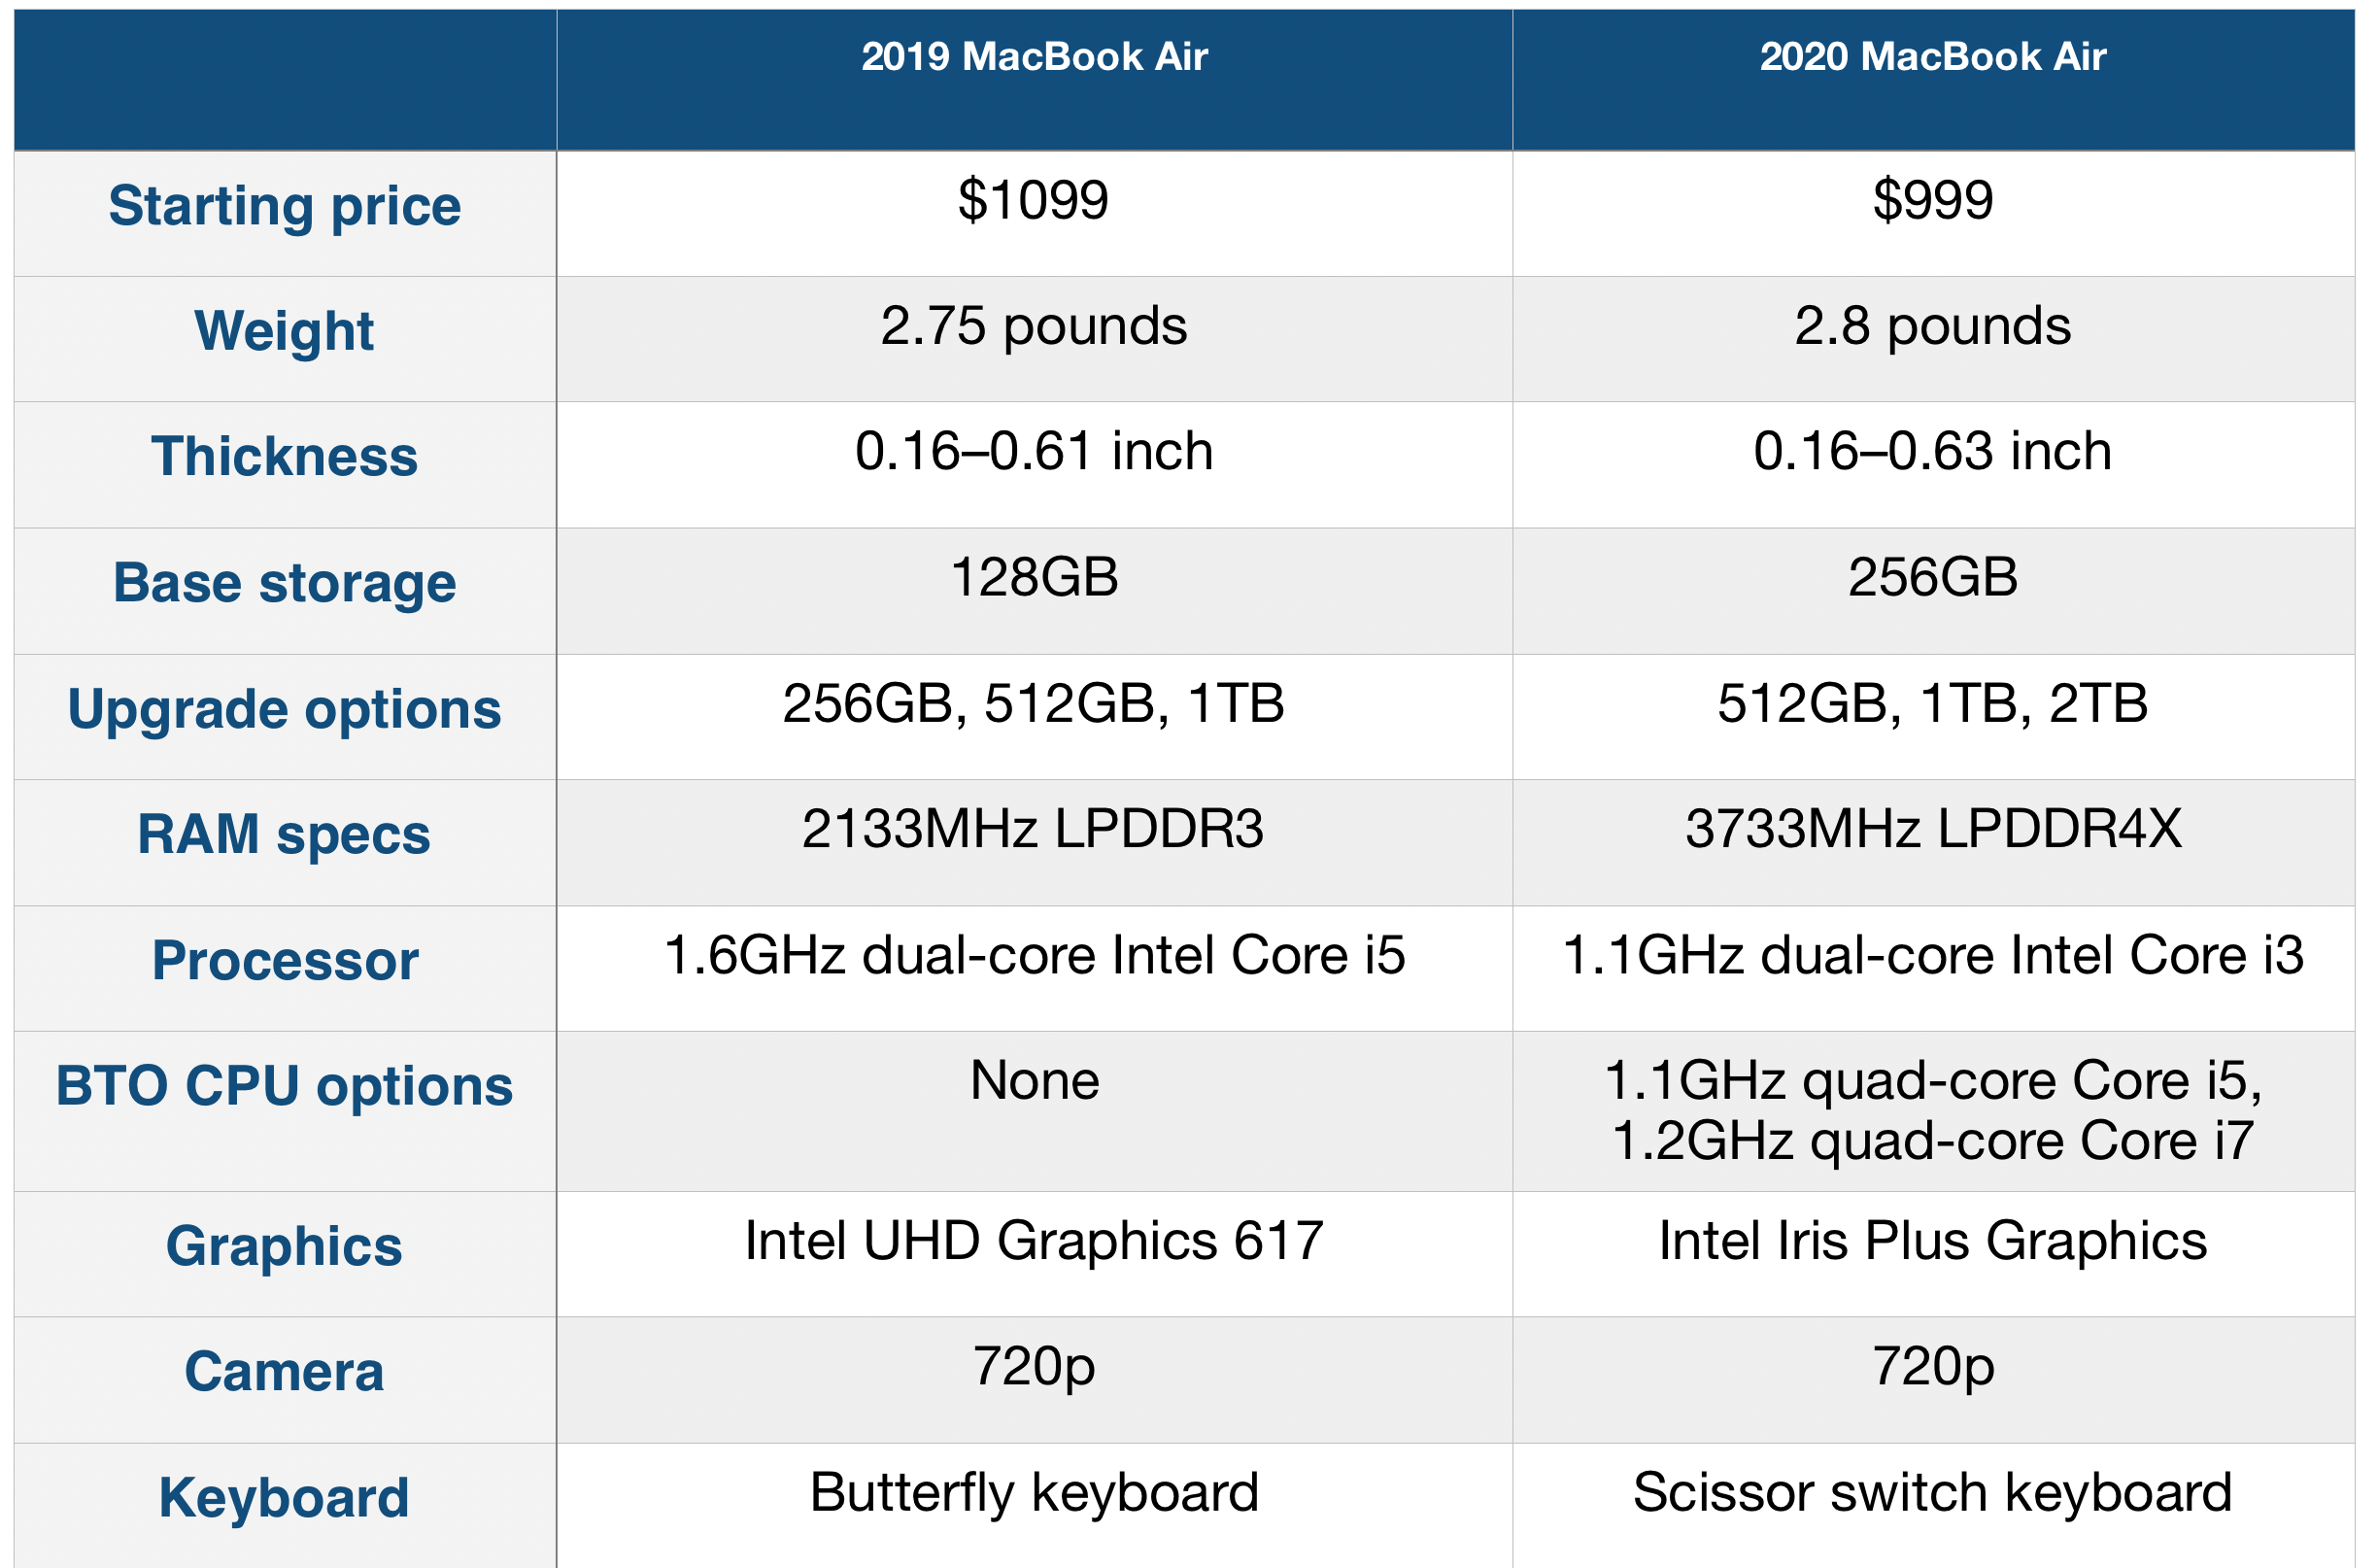 Differences Between MacBook Air 2019 and 2020